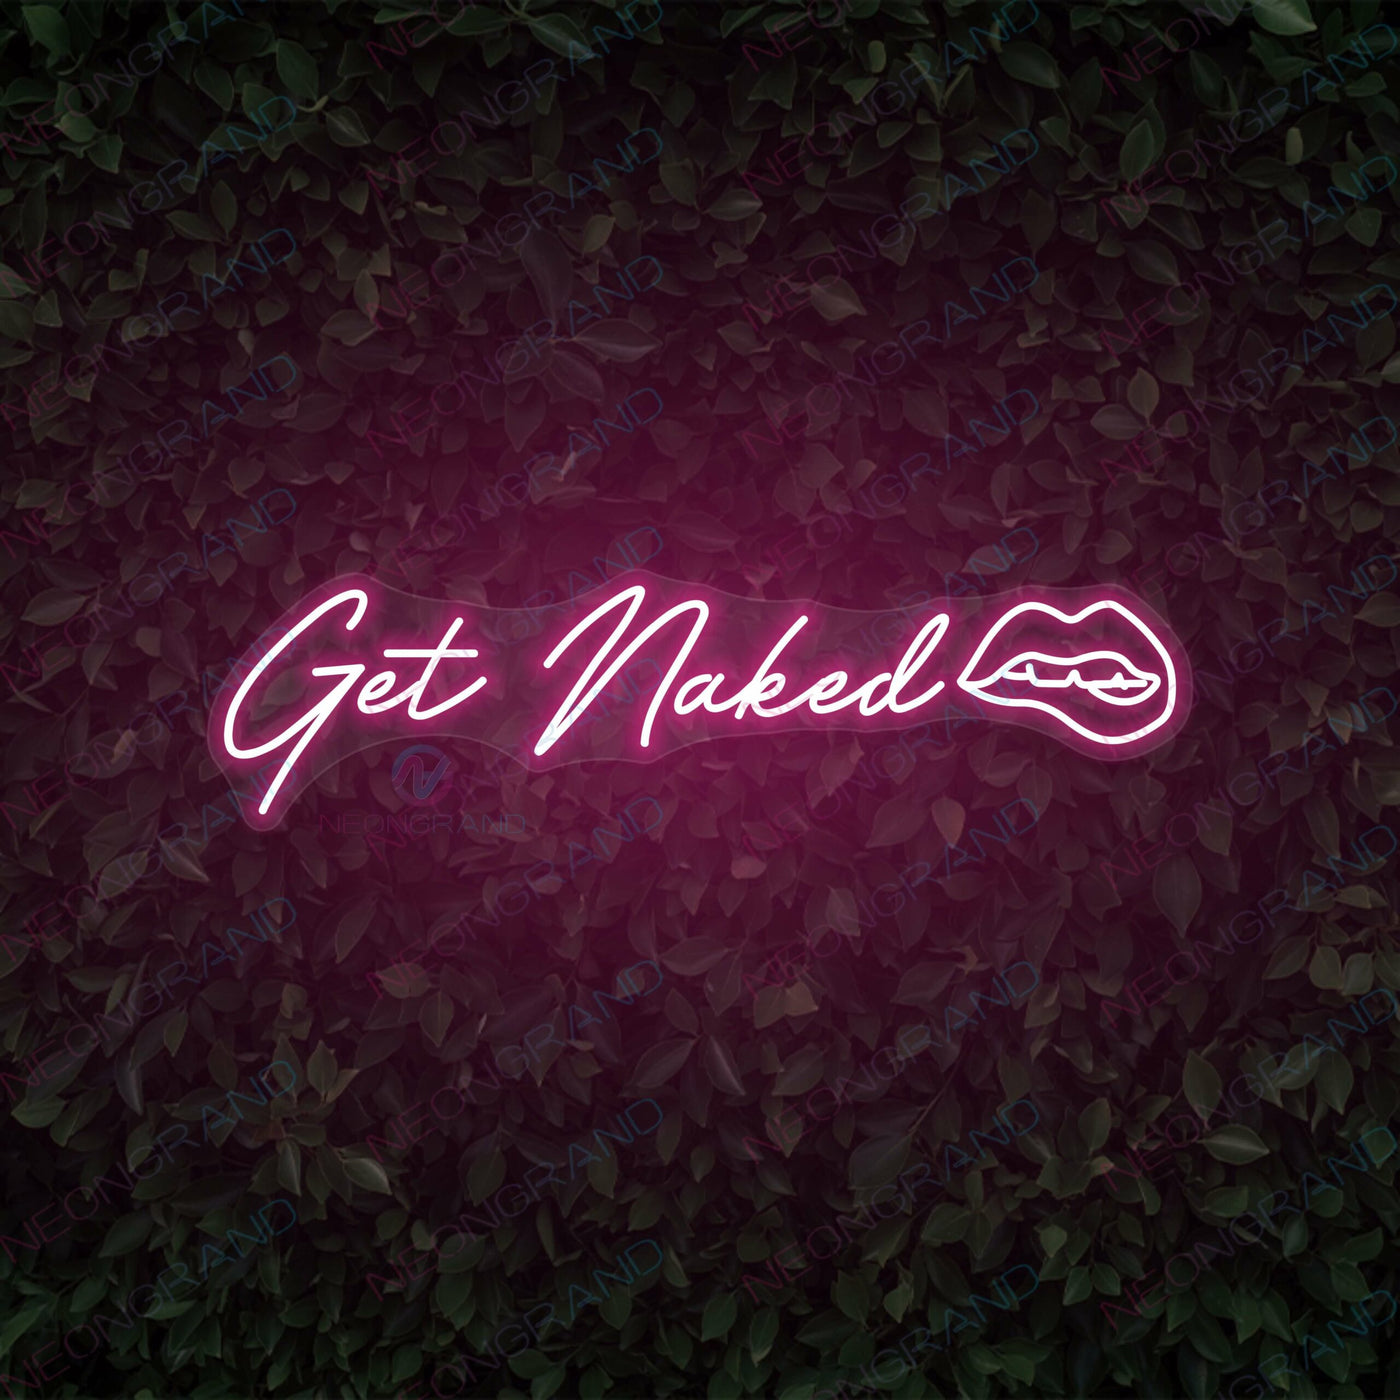 Get Naked Neon Sign Sexy Lips Led Light PINK